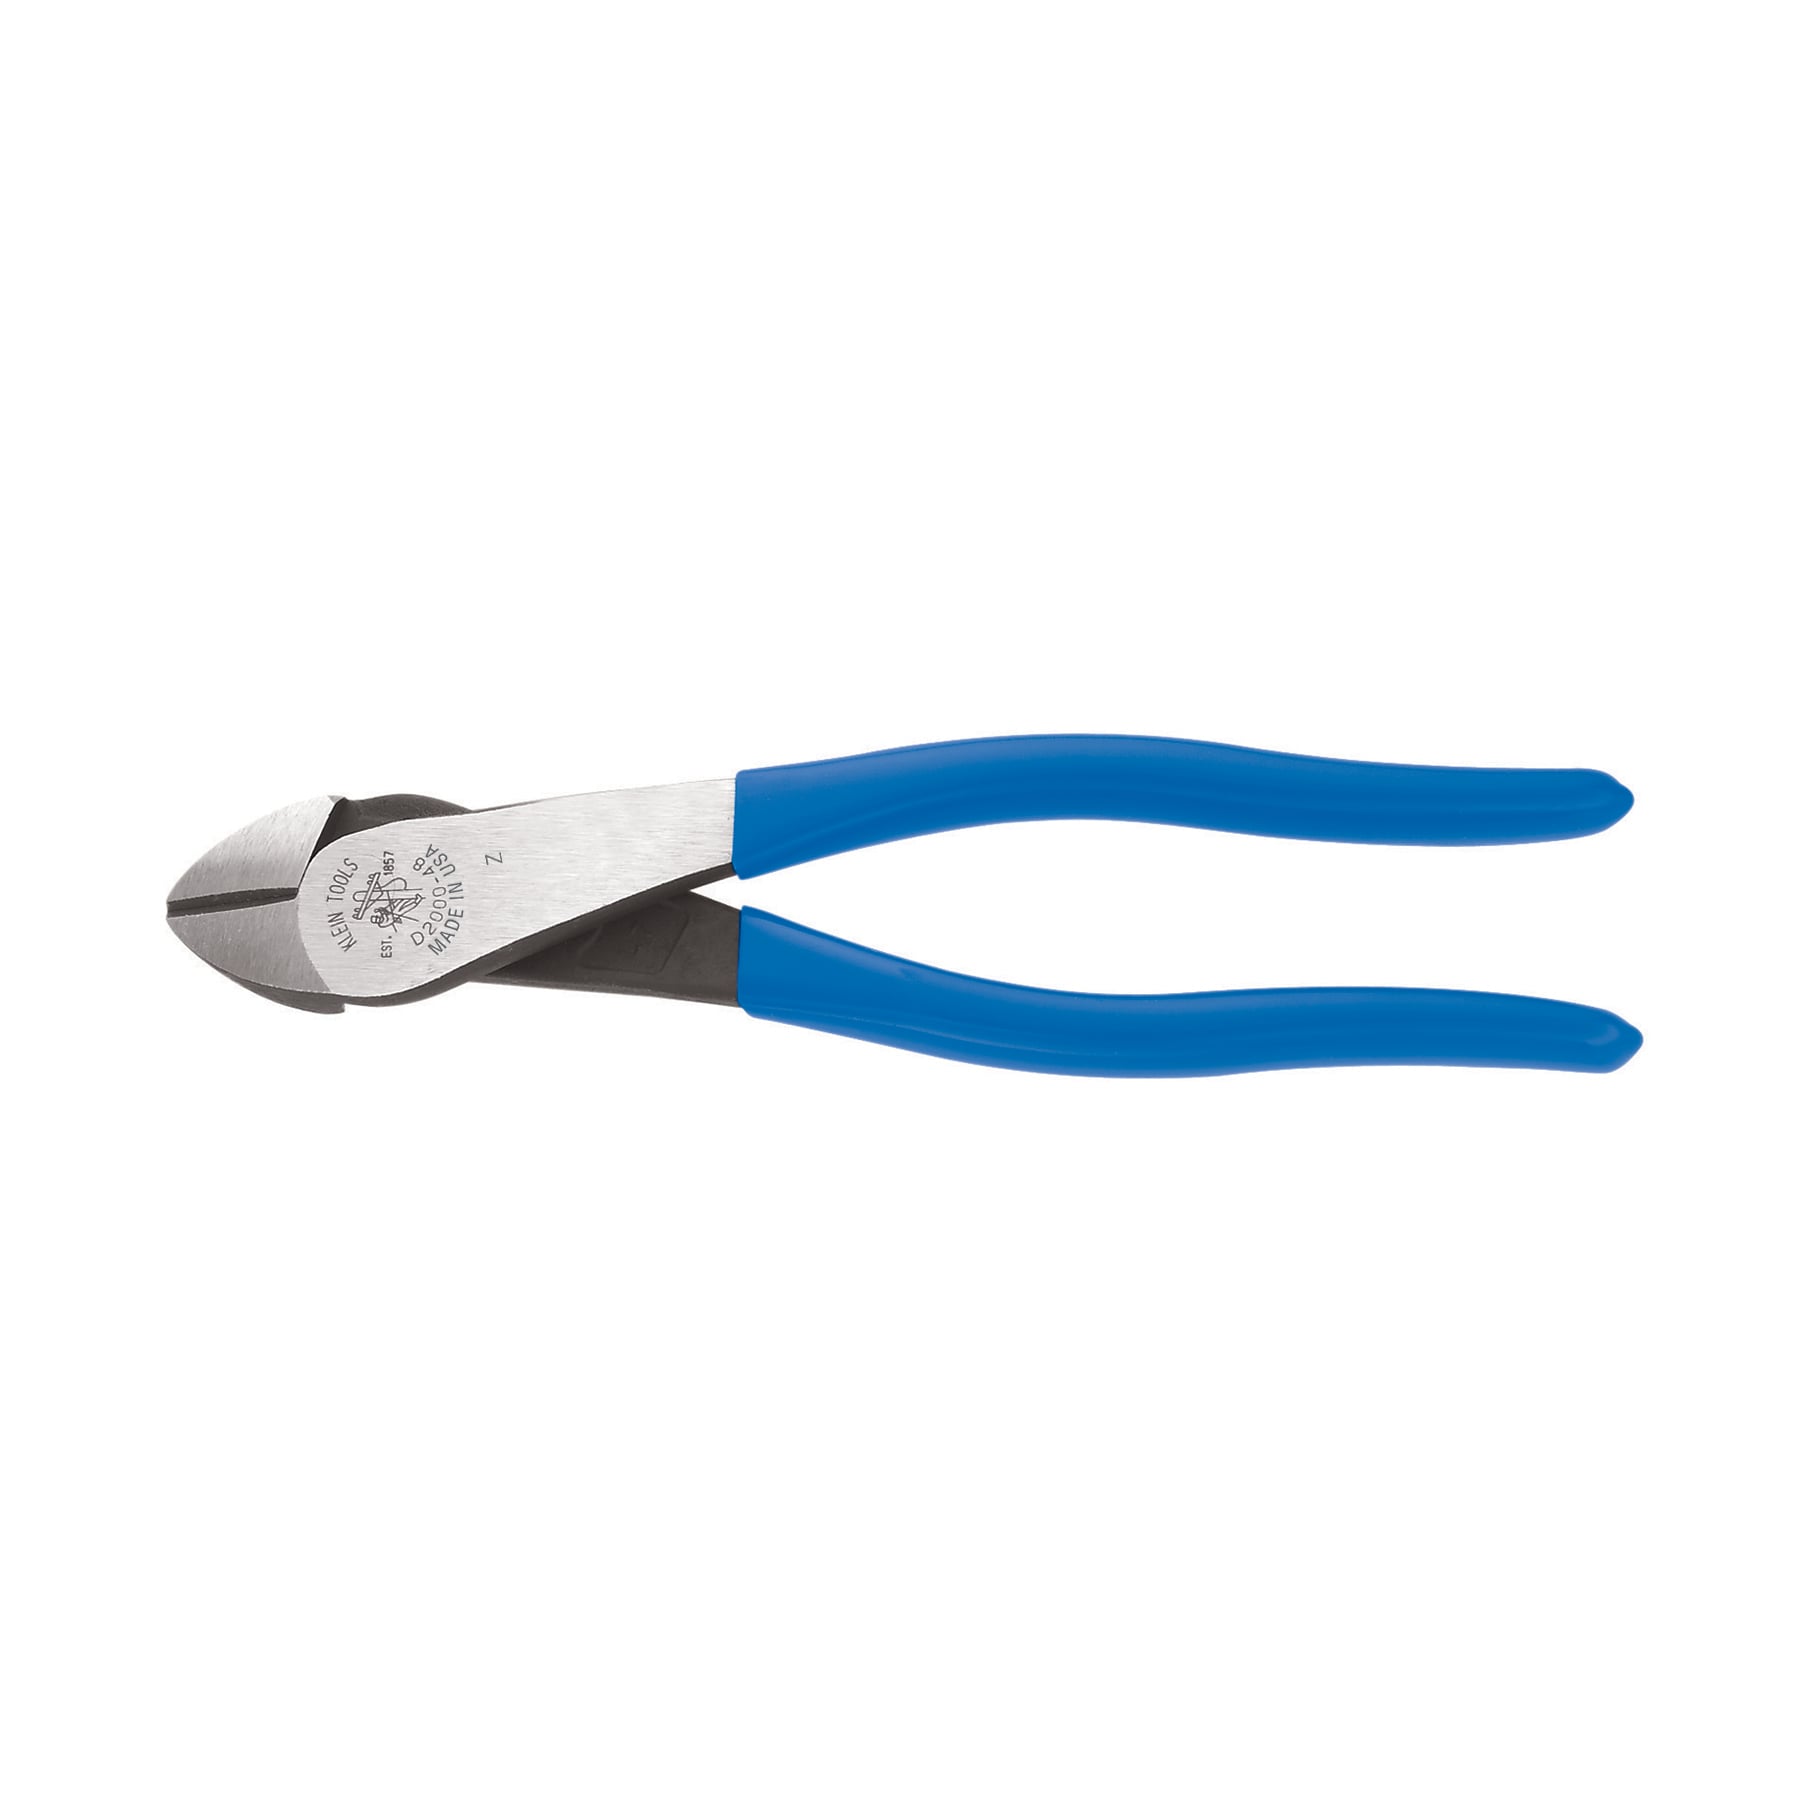 Klein Tools D335-51/2C Linemans Pliers, Needle Nose Side Cutters, Spring  Loaded, 5-Inch, Extra Slim - Midget Klein Flush Cuts 